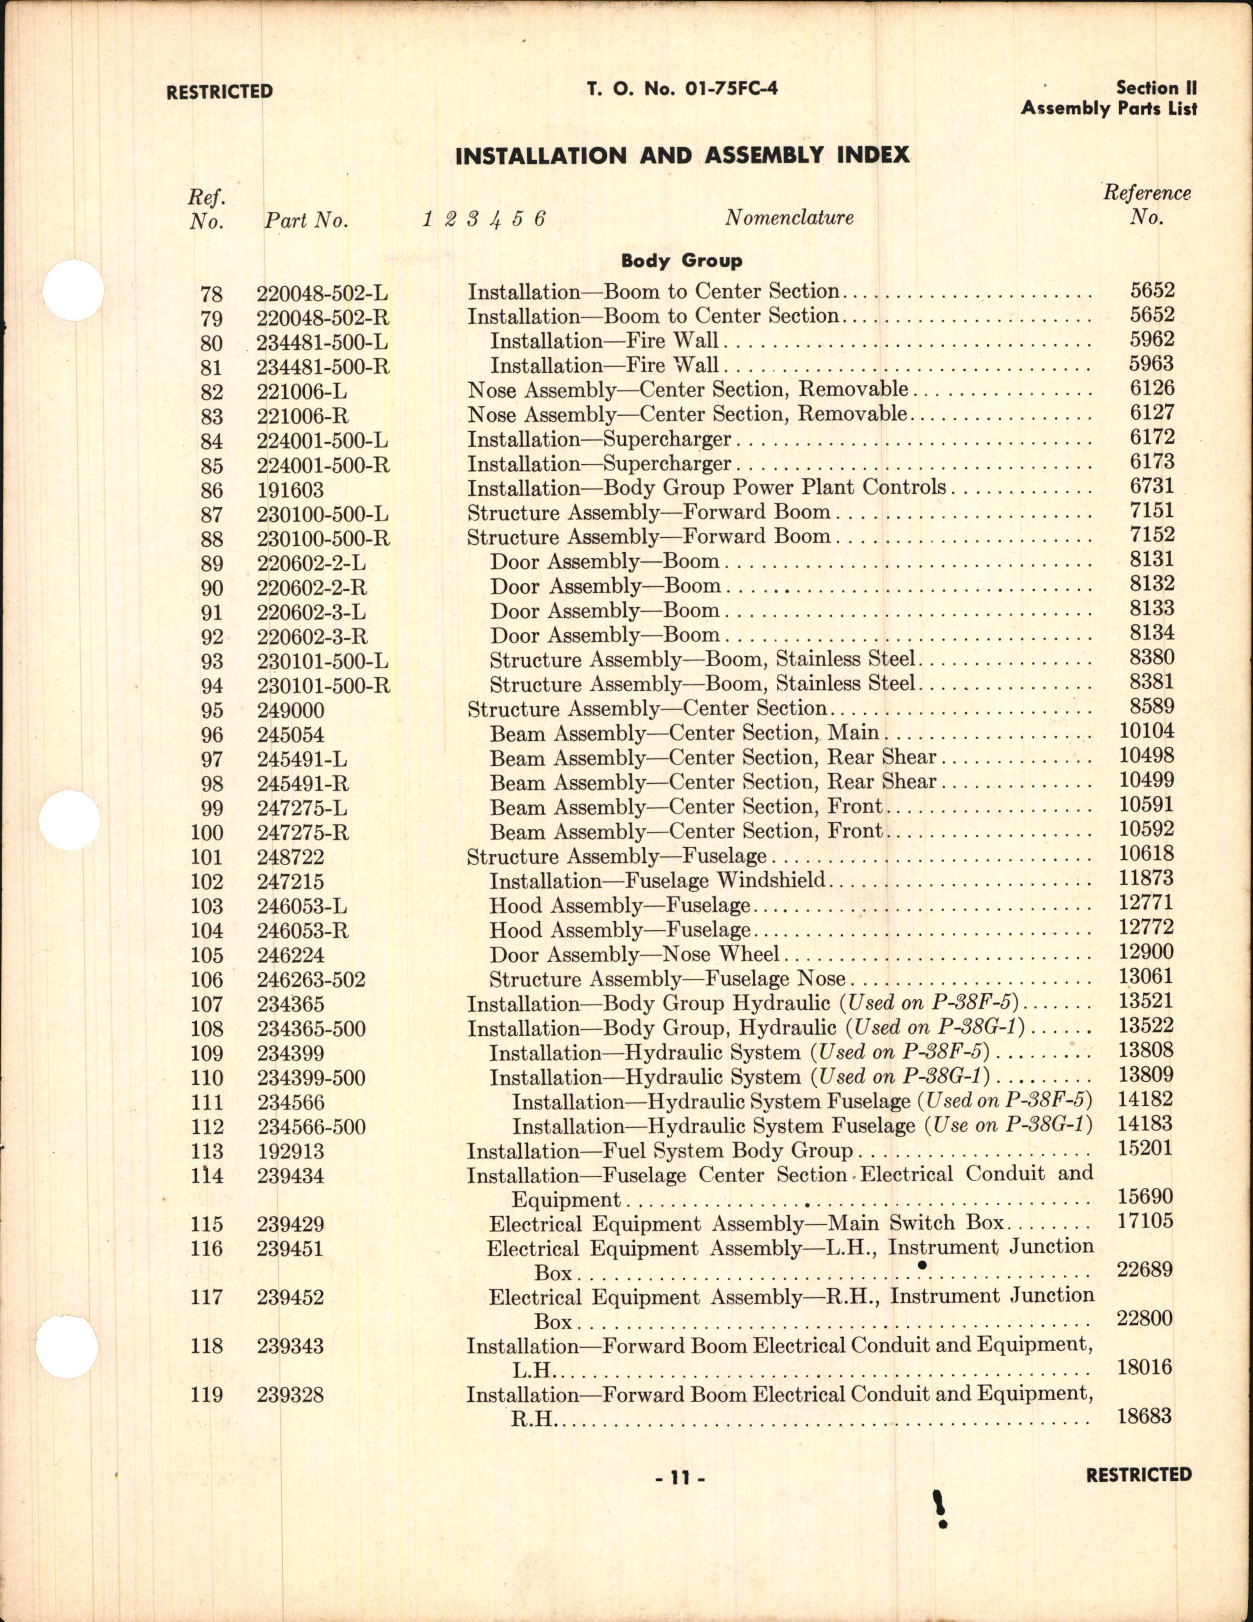 Sample page 7 from AirCorps Library document: P-38 Assembly Parts List (Section II) and Numerical Parts List (Section III)